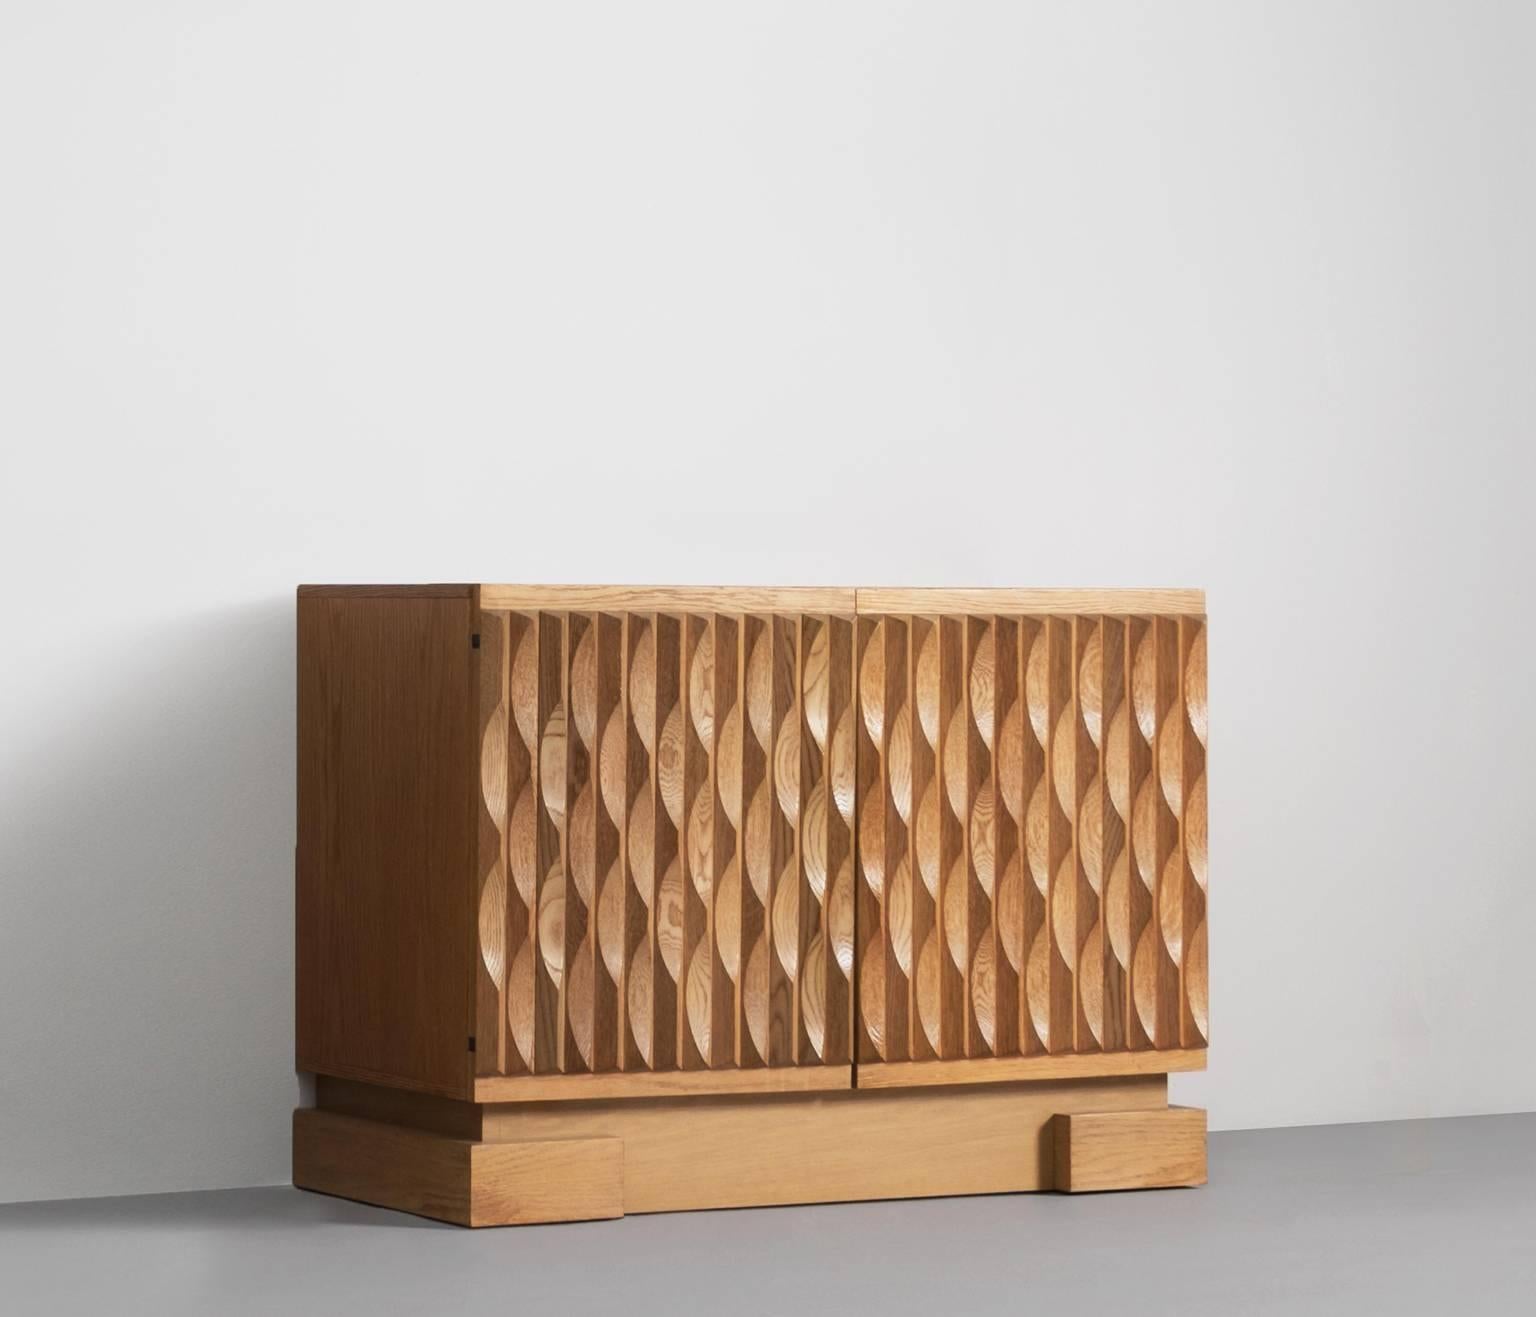 Wonderful Brutalist sideboard with very nice designed solid oak door panels, Belgium, 1970s.

In the 1970s a few Belgium designers started experimenting this kind of designs. Most of them worked with veneered panels and graphic designs.

This